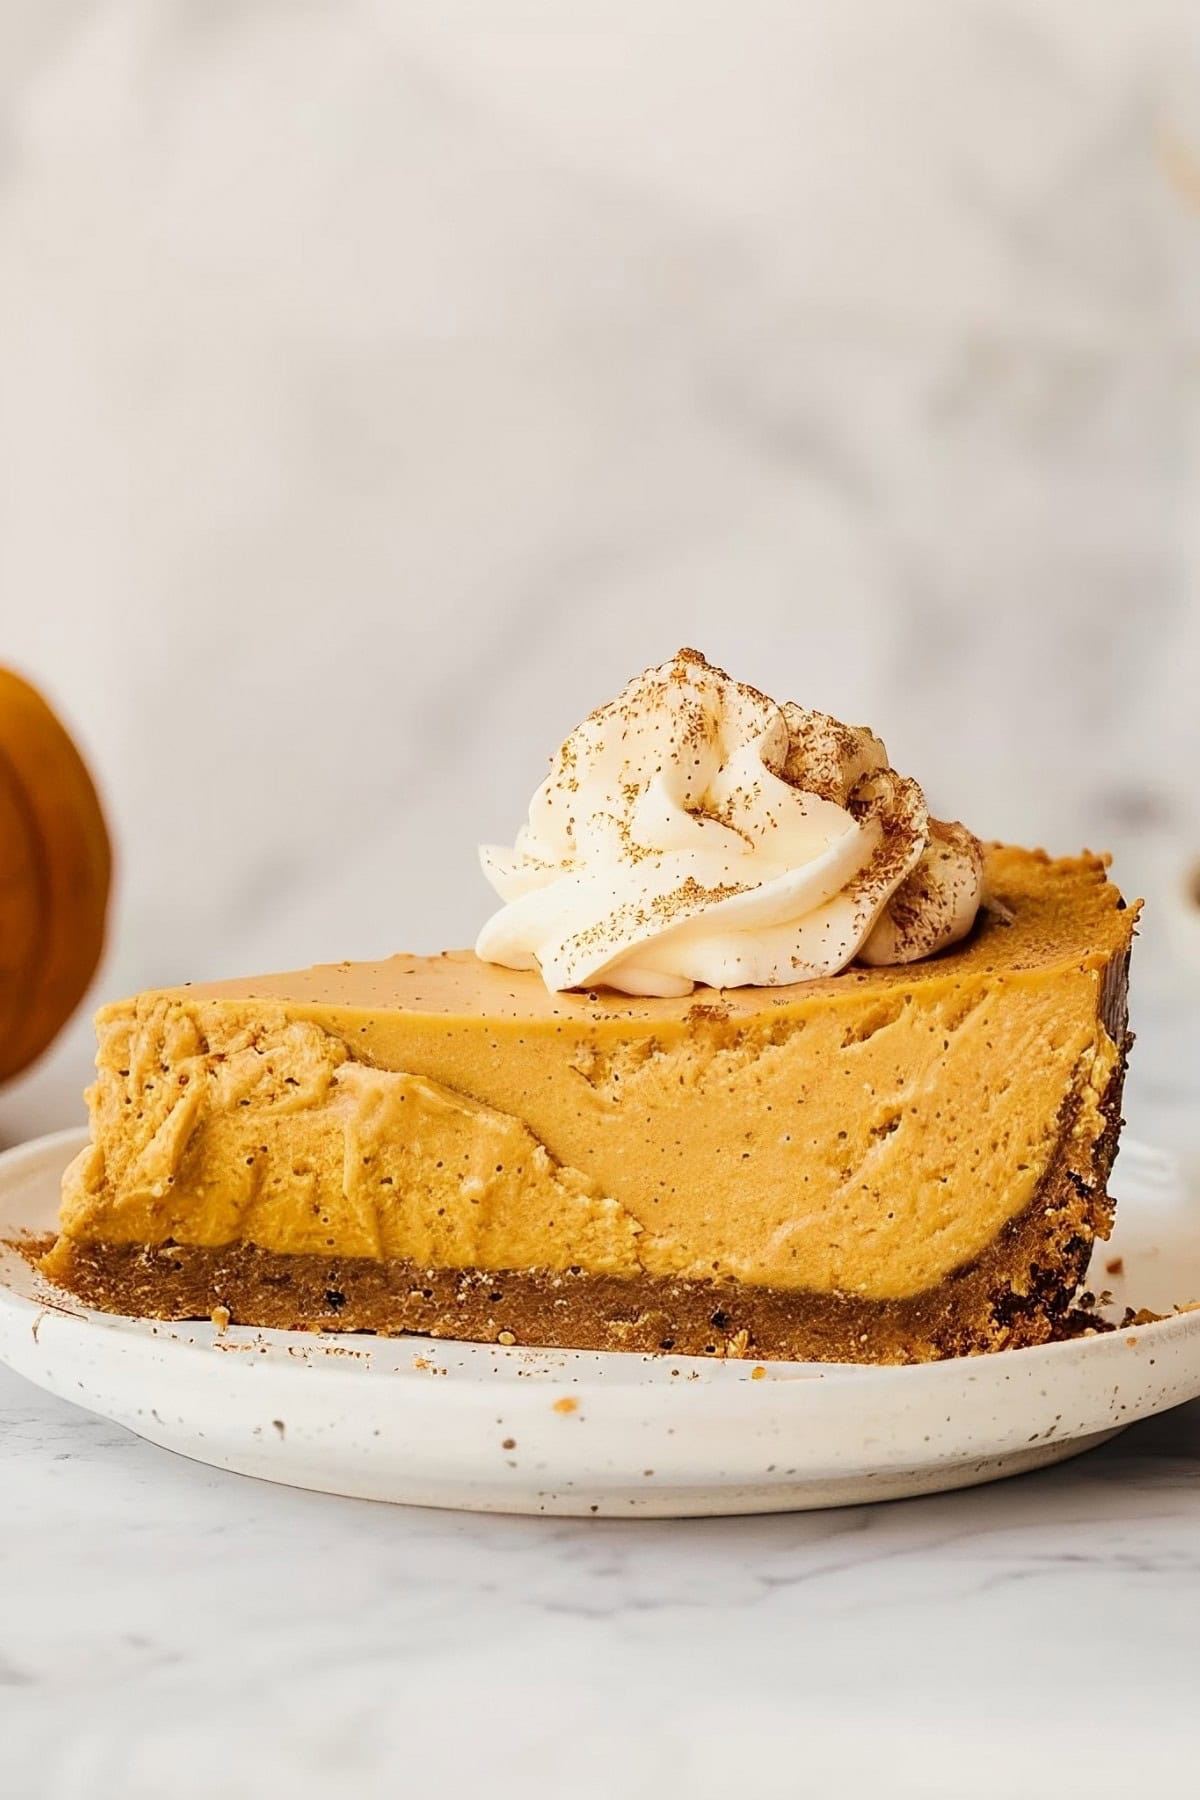 Homemade no-bake pumpkin cheesecake, topped with a swirl of whipped cream and a sprinkle of cinnamon for extra flavor